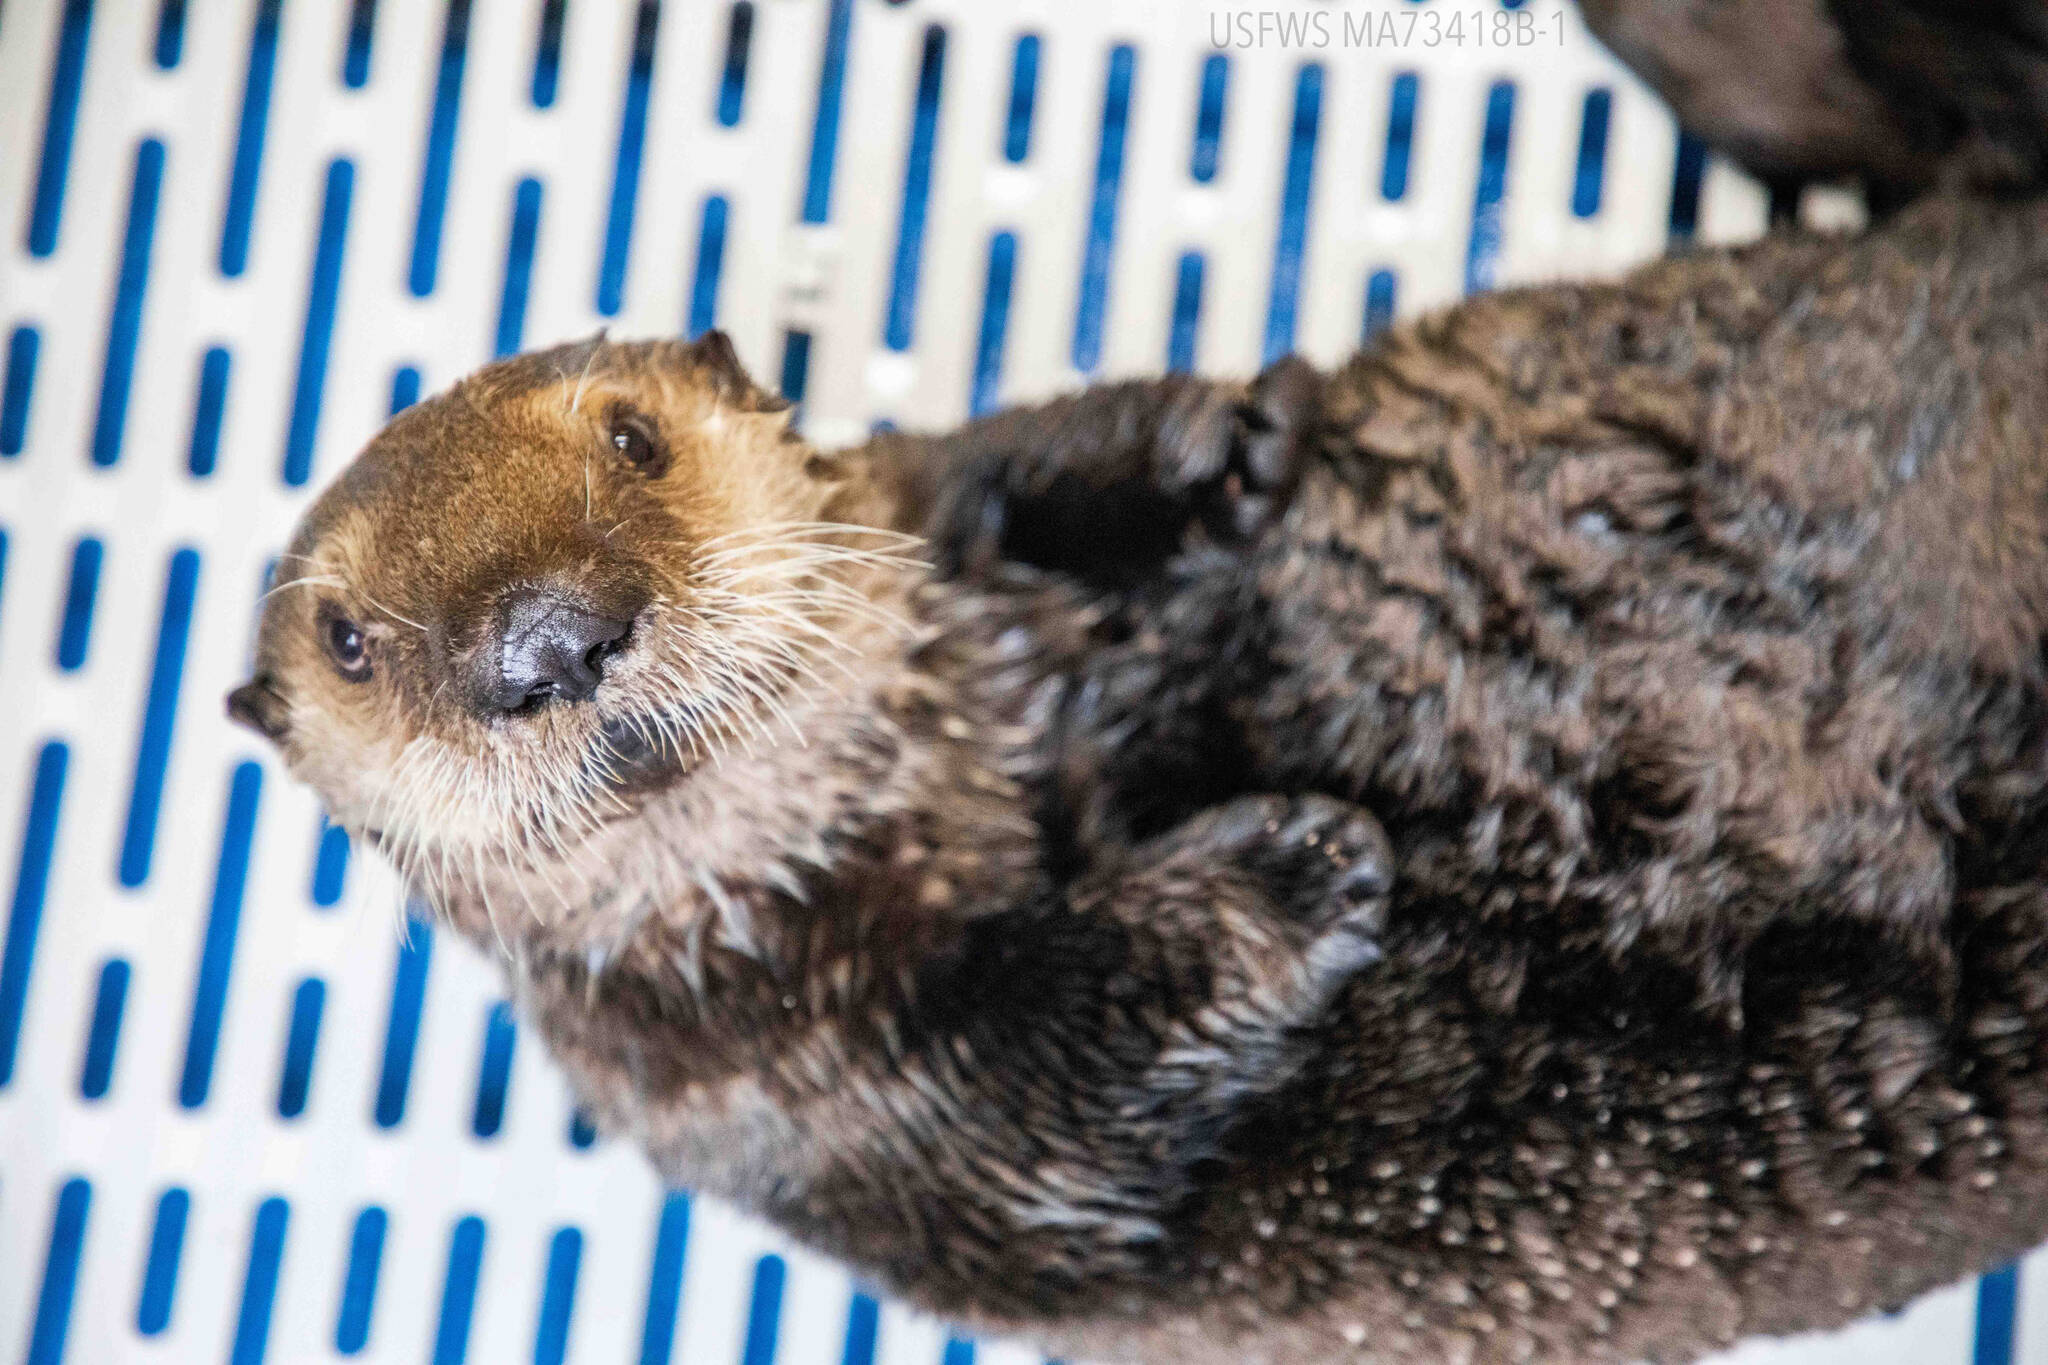 Qilak the otter pup looks at the camera after a feeding session at the Alaska SeaLife Center. The otter pup was admitted as a patient on Sept. 7, 2022, after being found on top of his moribund mother. (Photo Credit: Alaska SeaLife Center)